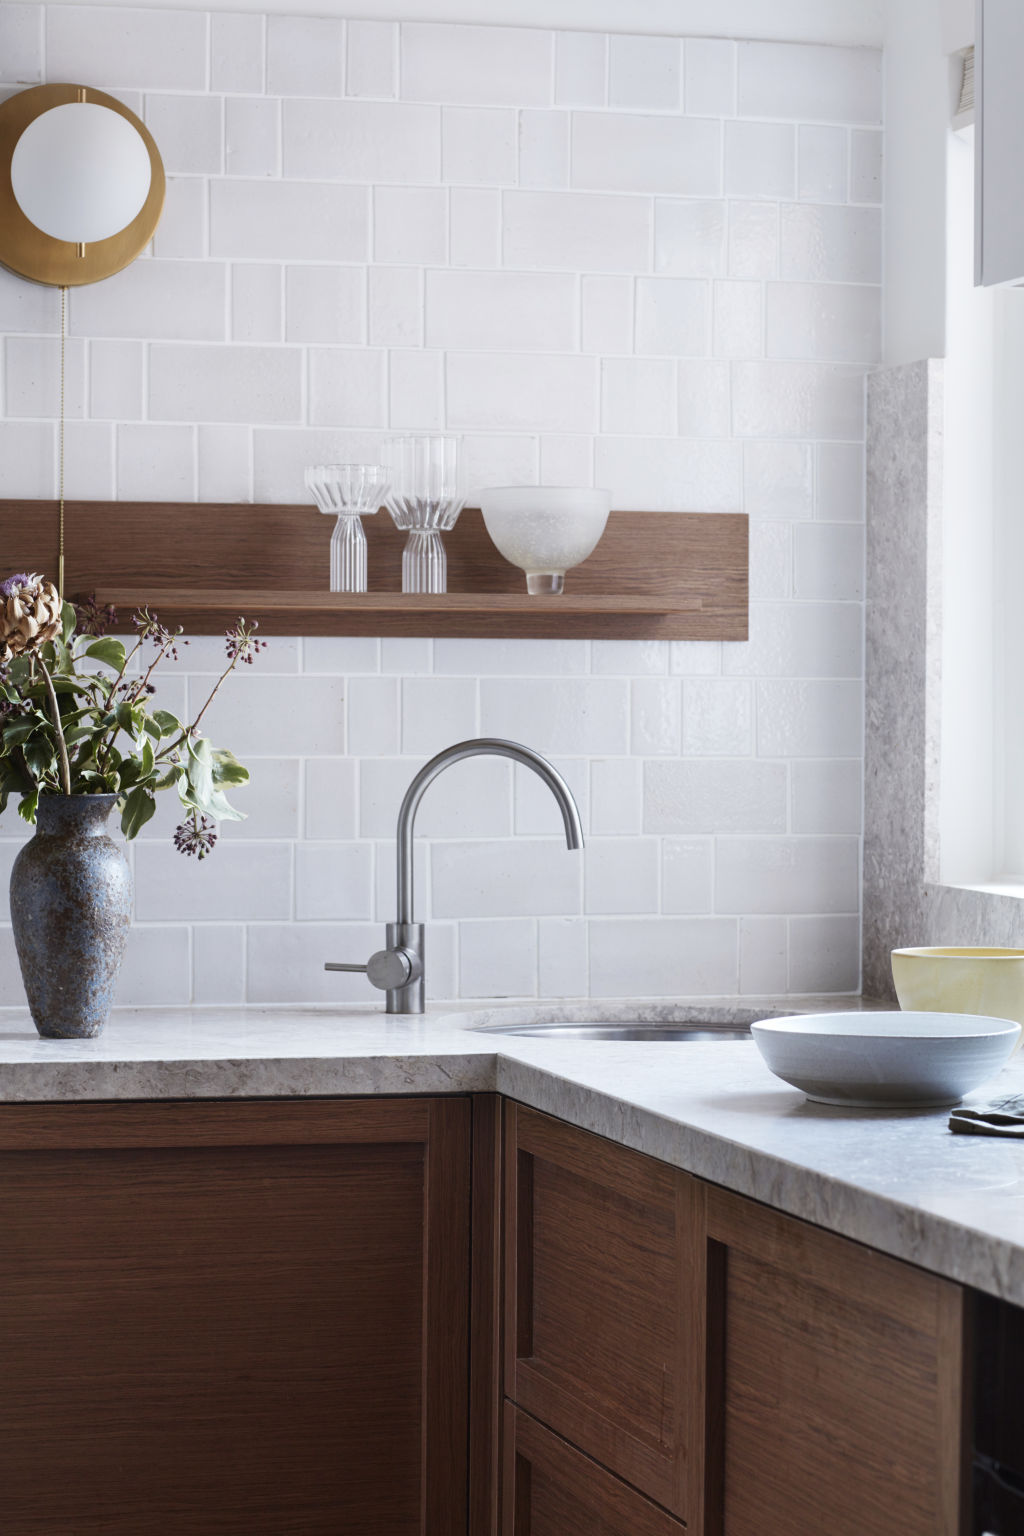 When it comes to sinks, it’s important to pick the right one for your needs. Photo: Prue Ruscoe. Styling: Studio Gorman